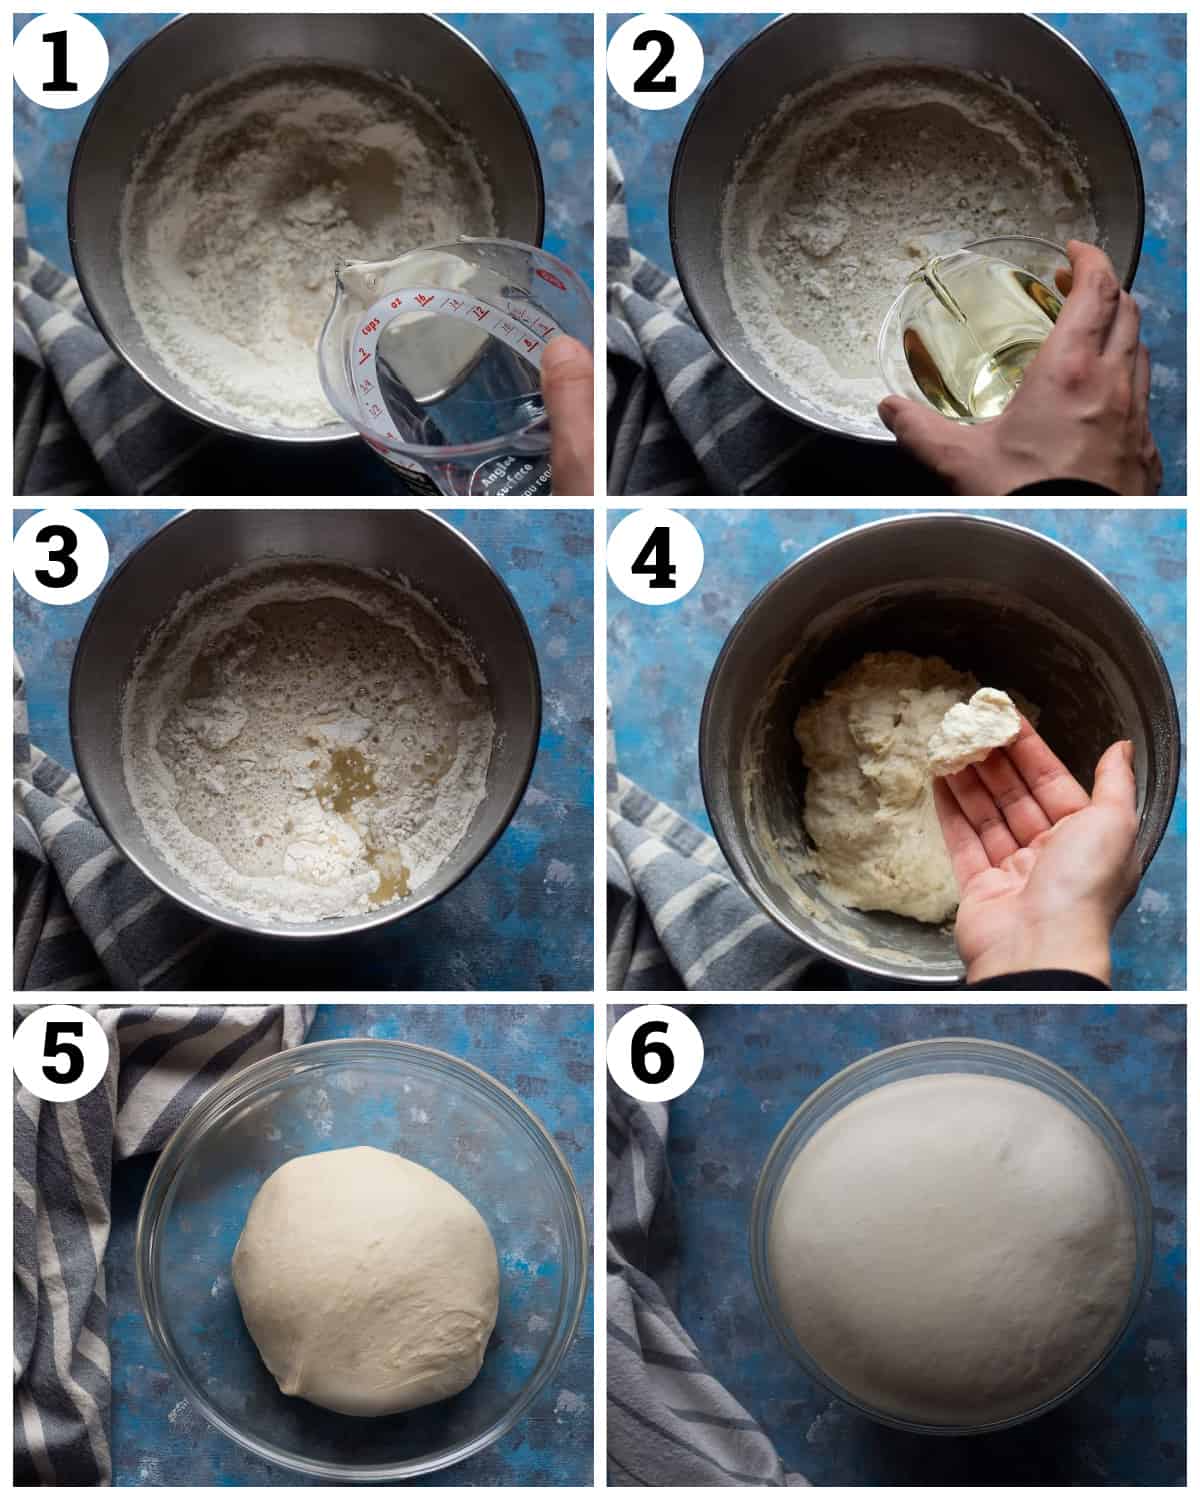 Start by placing 4 cups of flour, yeast, salt and sugar in a stand mixer bowl. Add in warm water and vegetable oil.